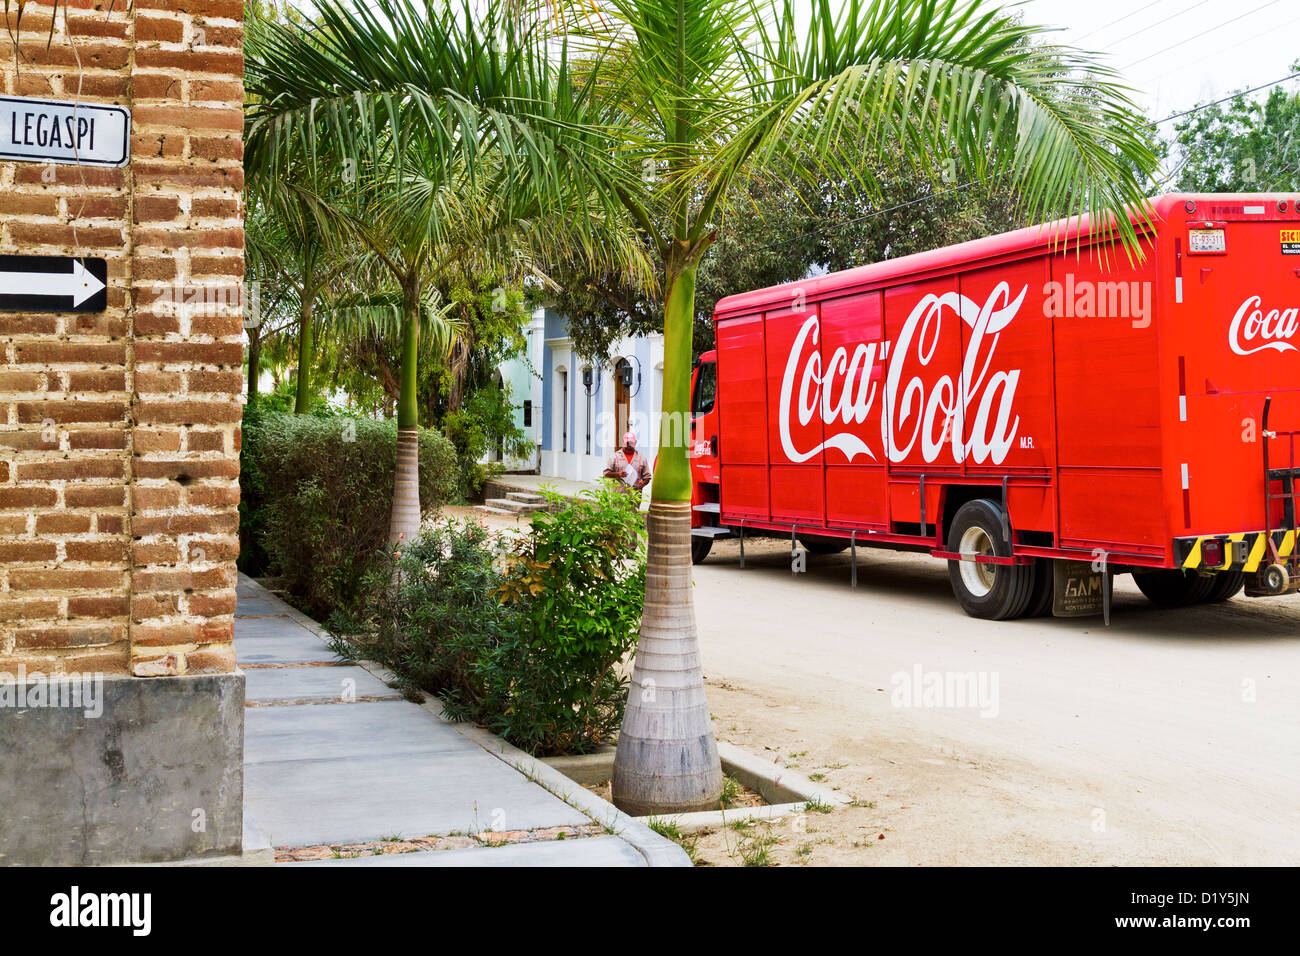 A Coca Cola truck is parked on a picturesque street in Todos Santos, Baja, Mexico Stock Photo